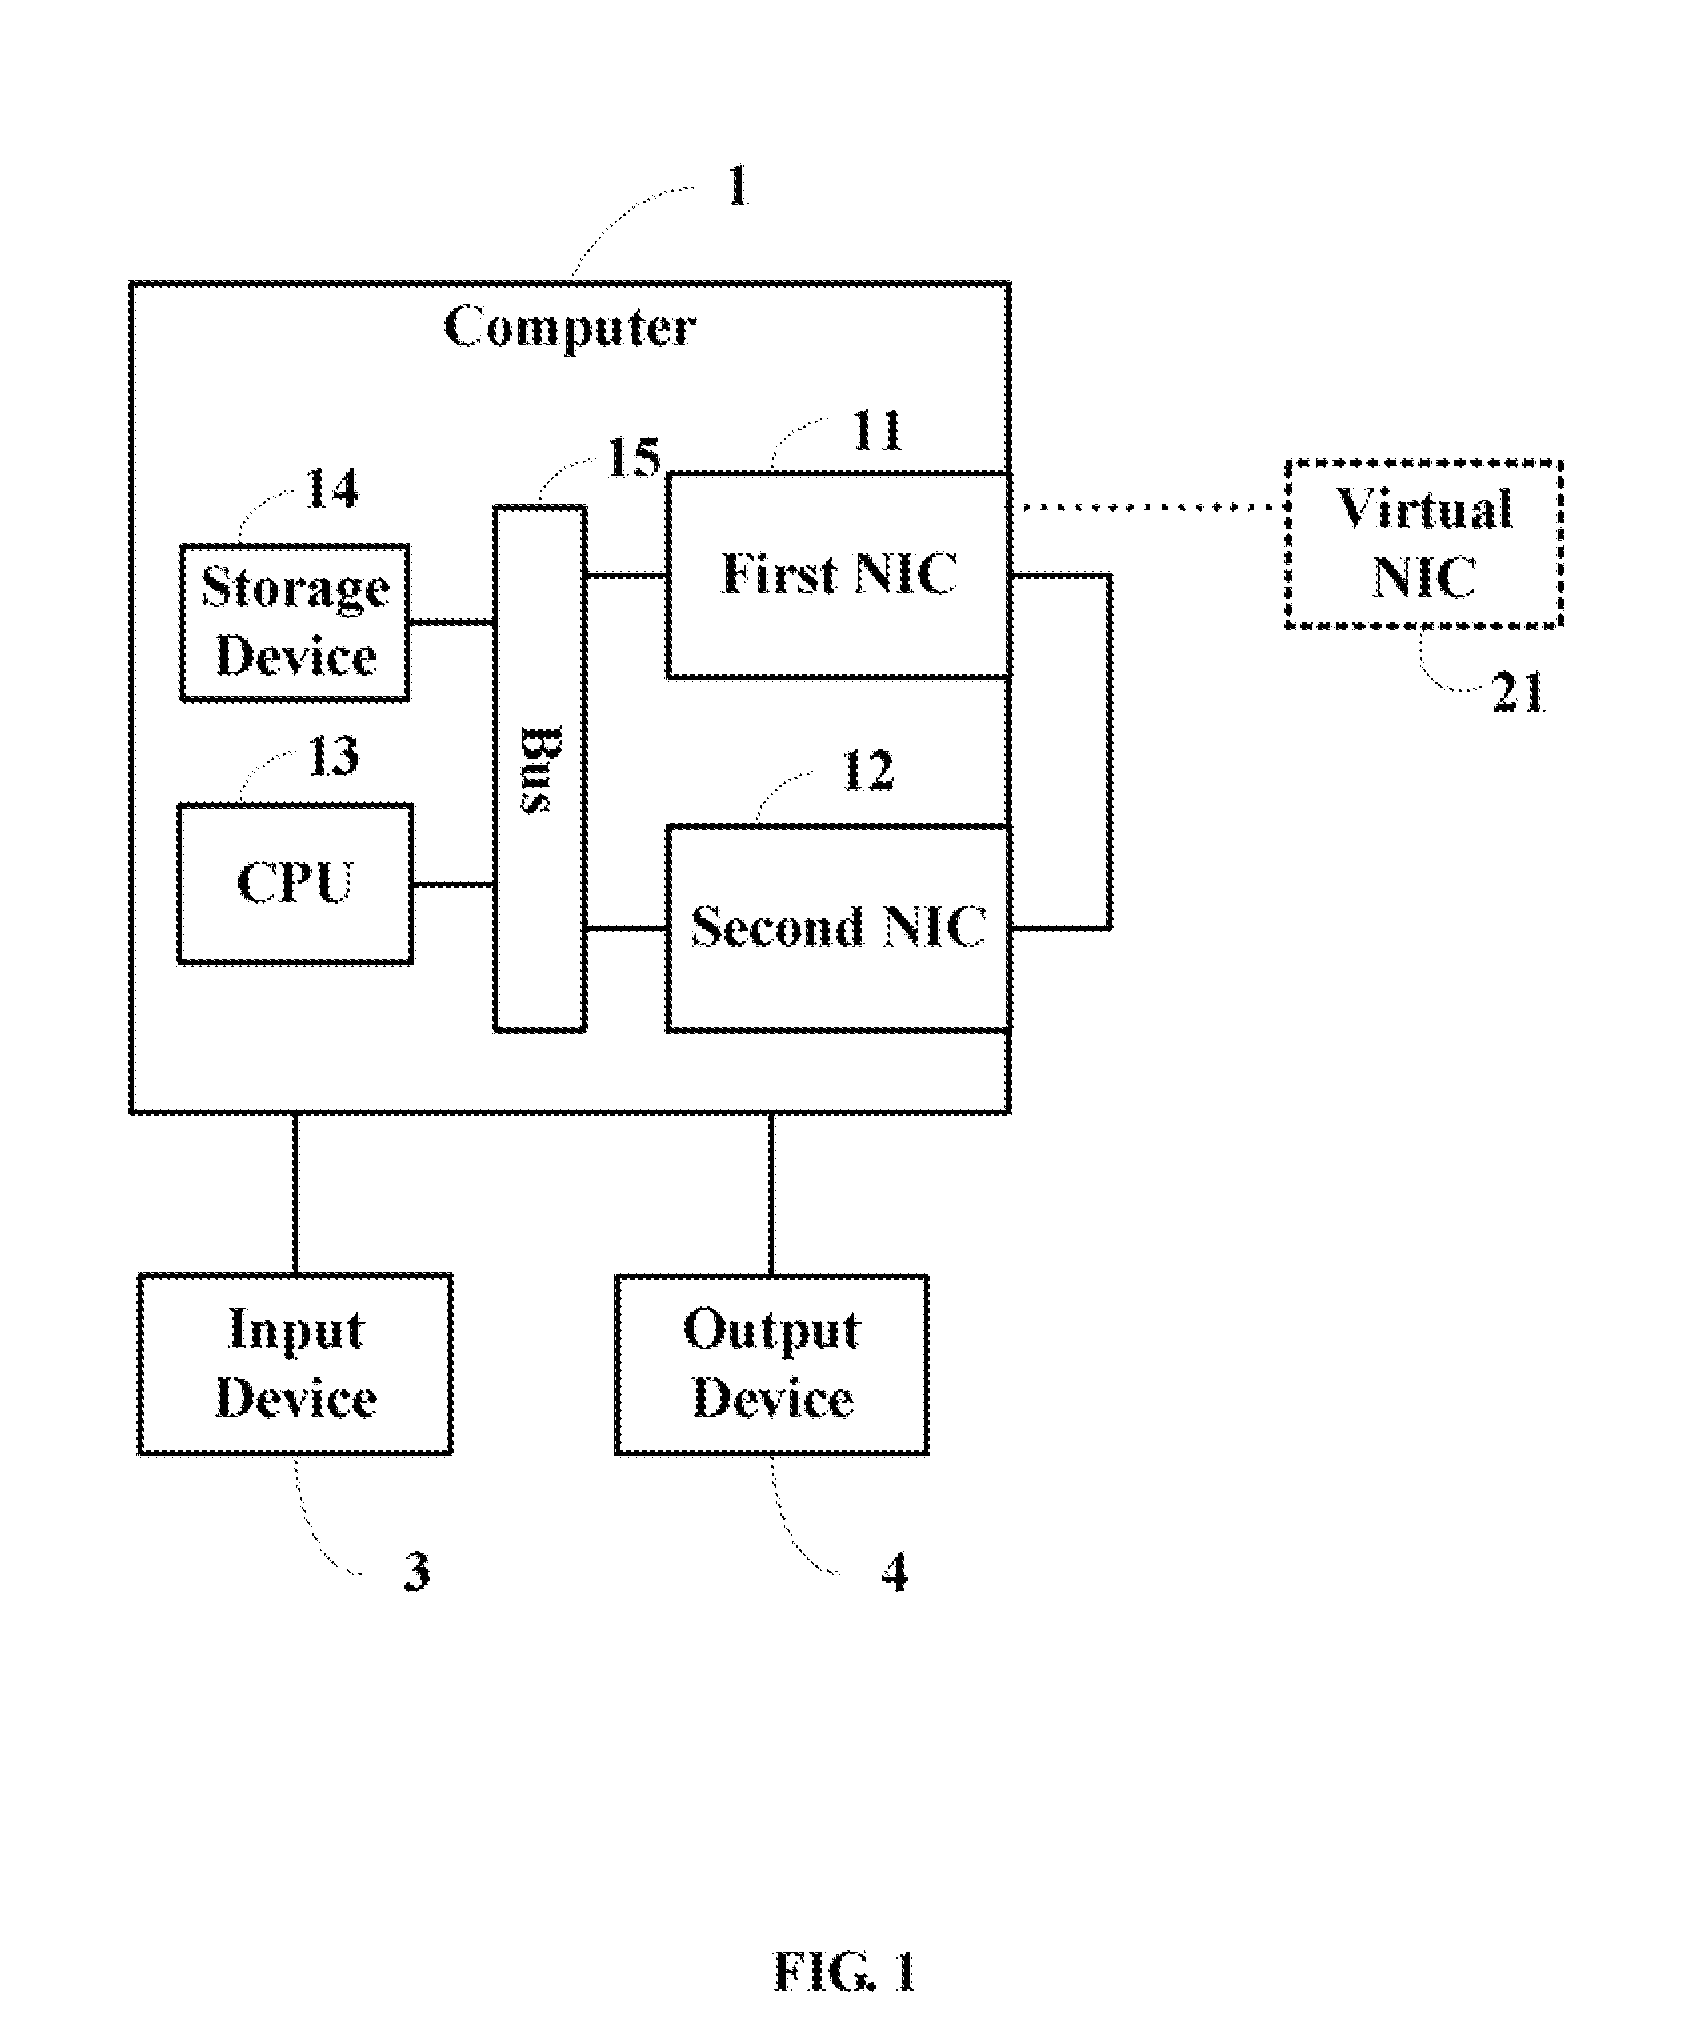 System and method for testing transmission speeds of network interface cards in a computer